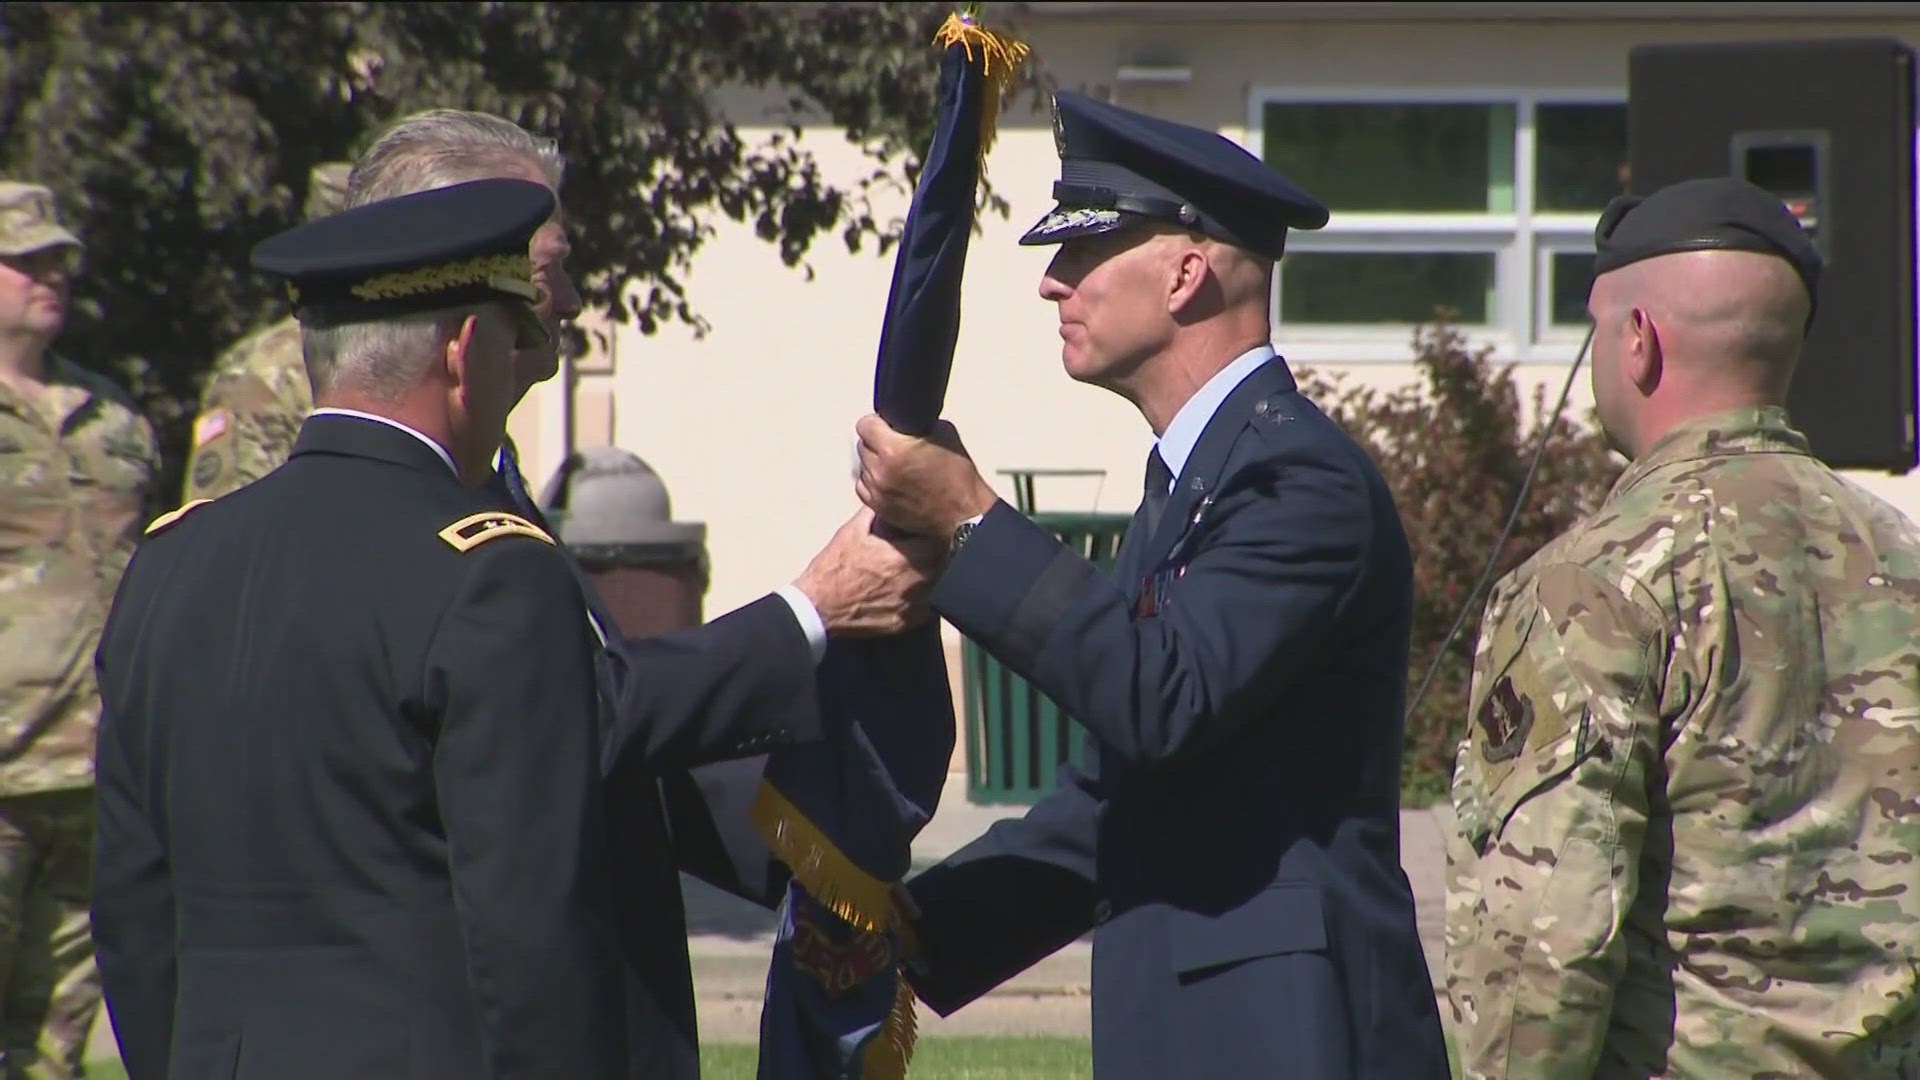 Major General Timothy Donnellan is now serving as the 26th adjutant general of Idaho and commander of the Idaho National Guard.